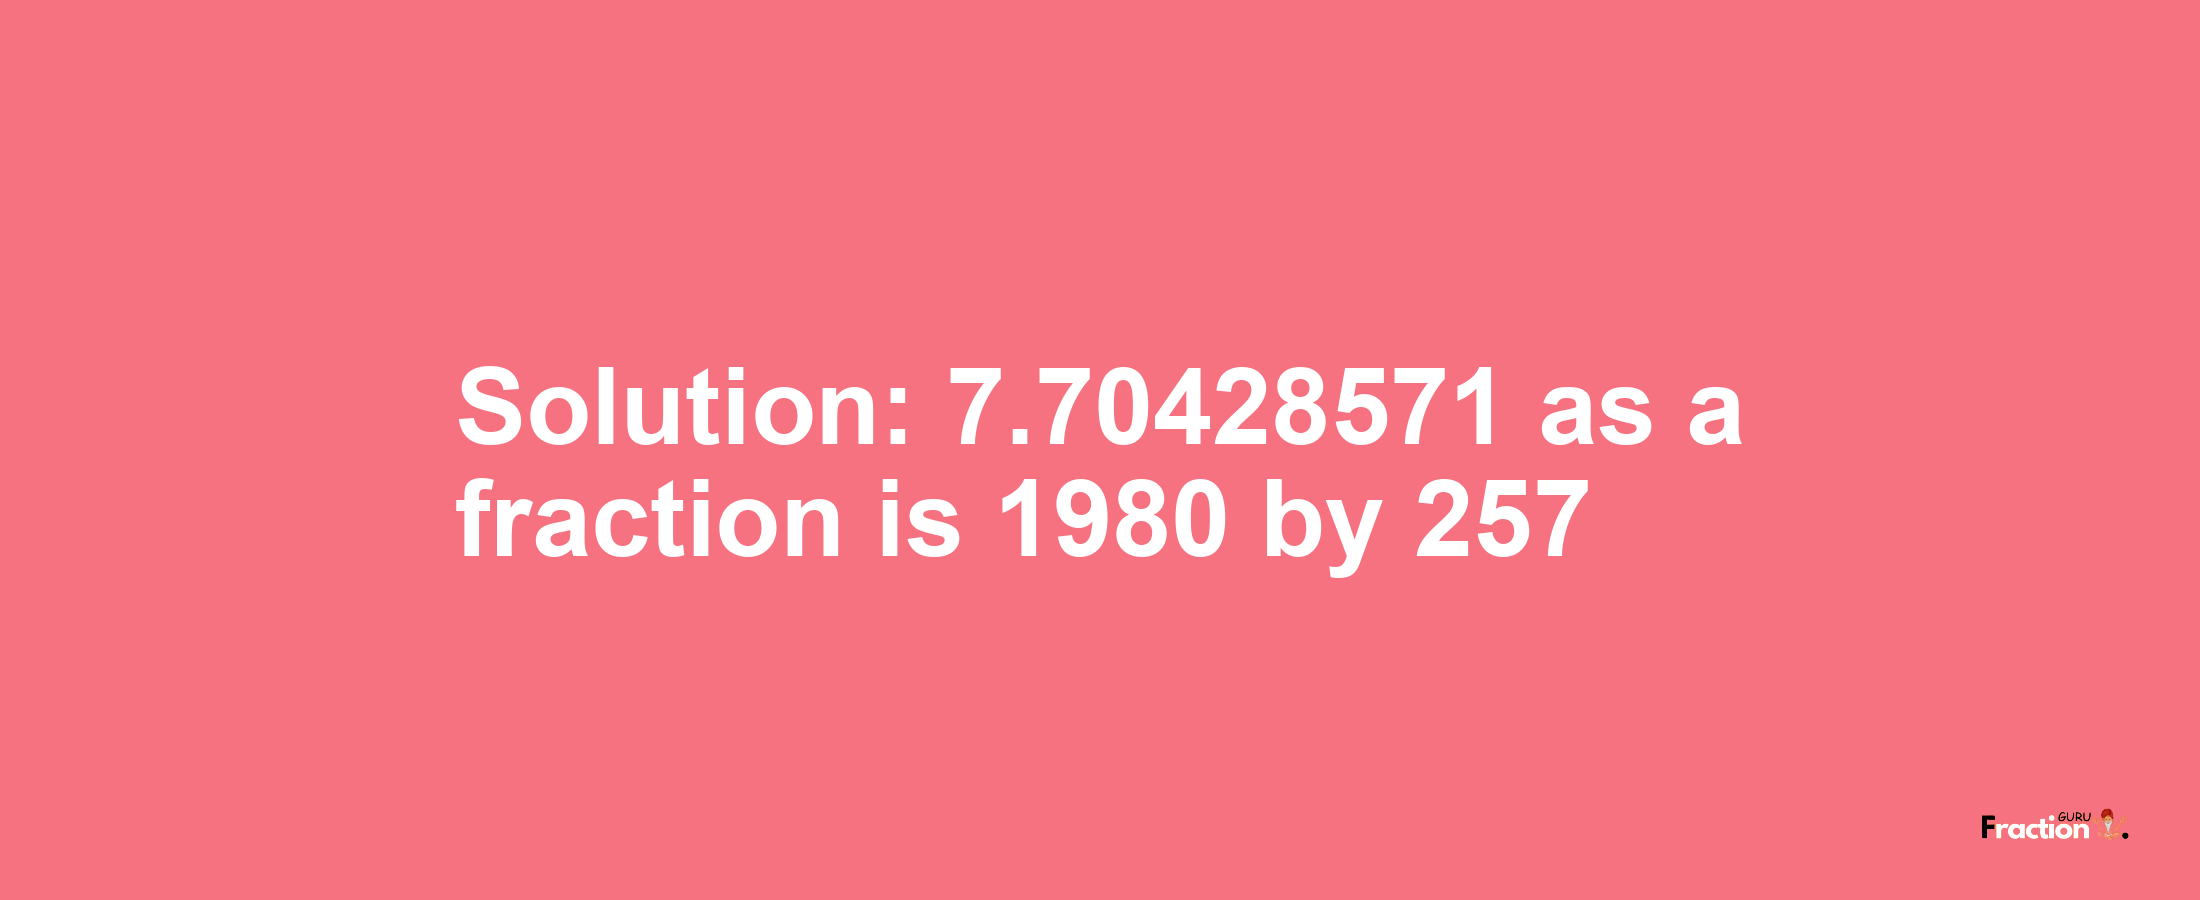 Solution:7.70428571 as a fraction is 1980/257